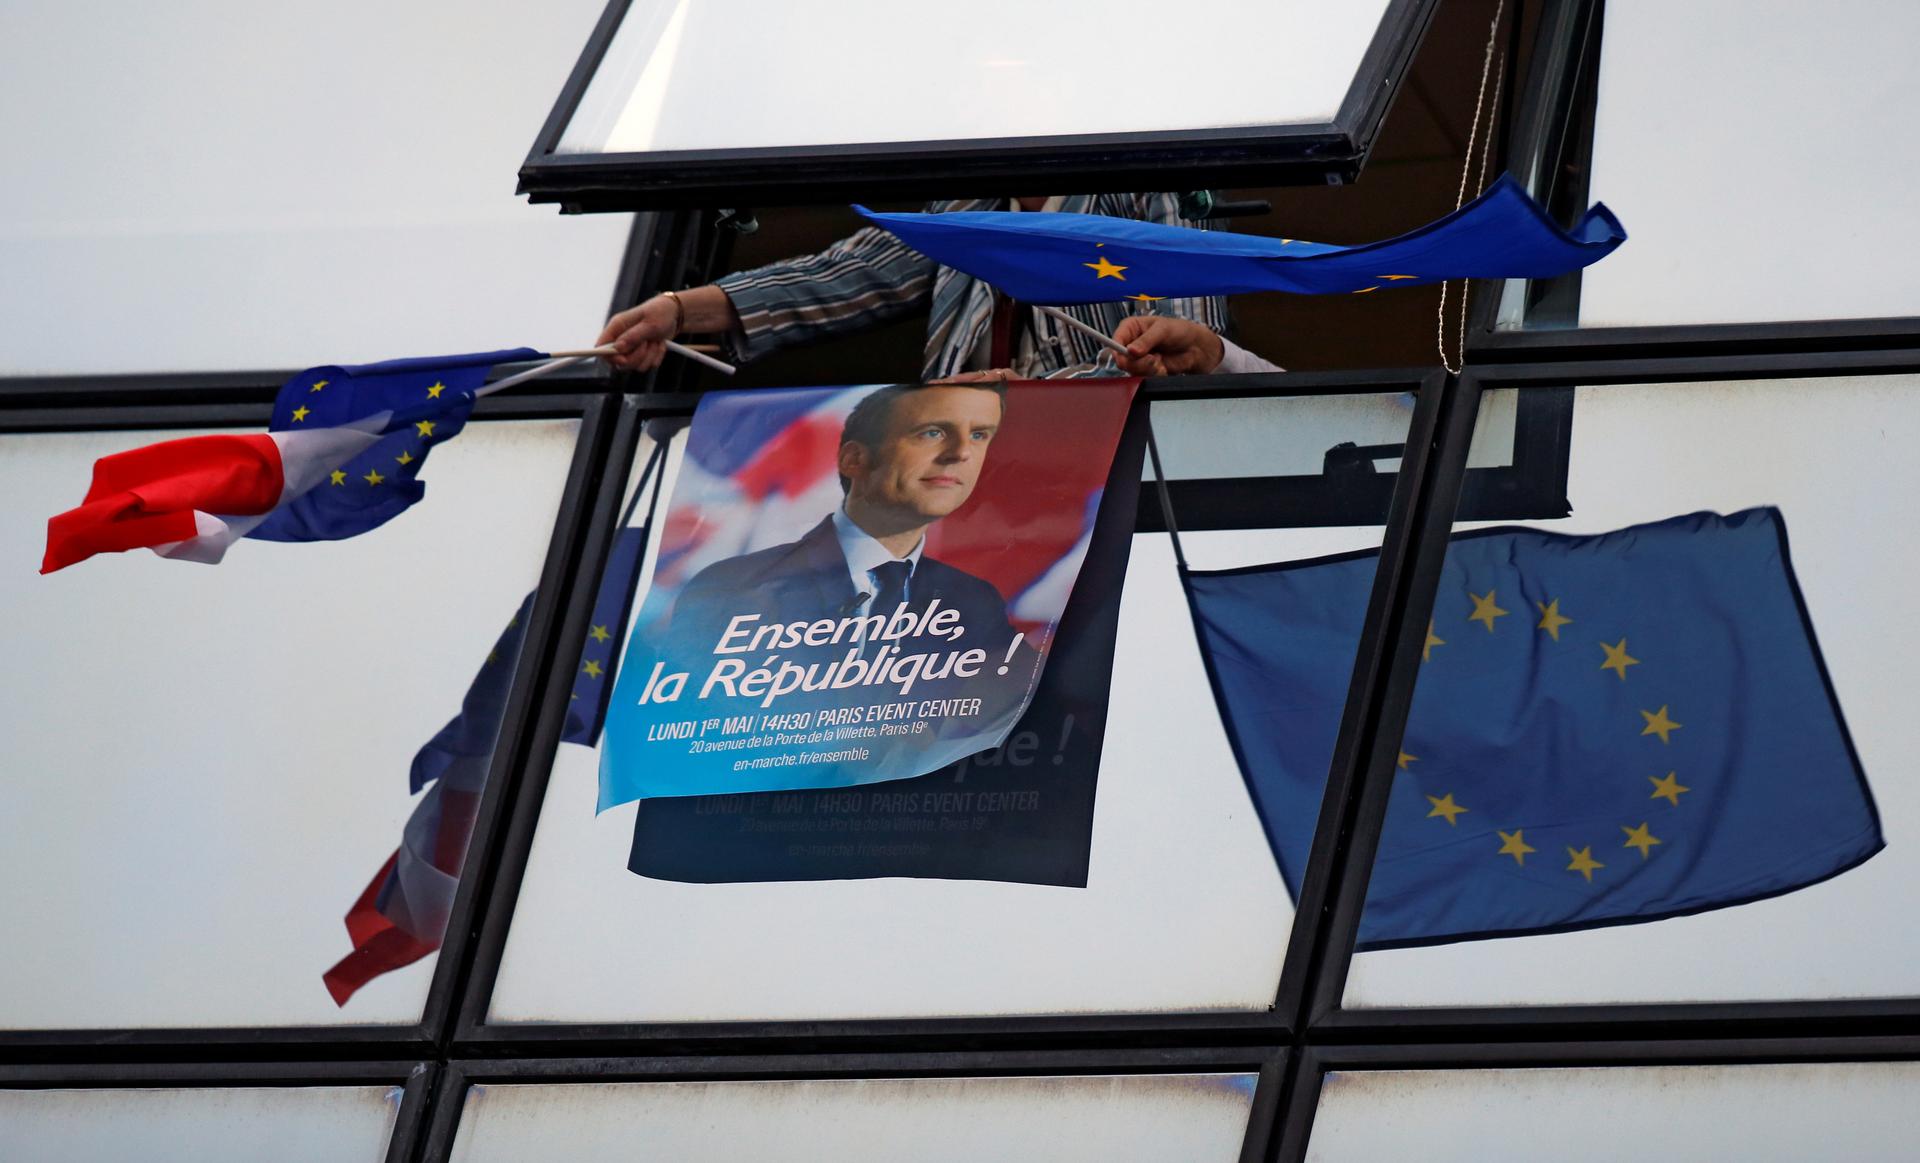 A supporter holds a campaign poster of Emmanuel Macron and European Union flags